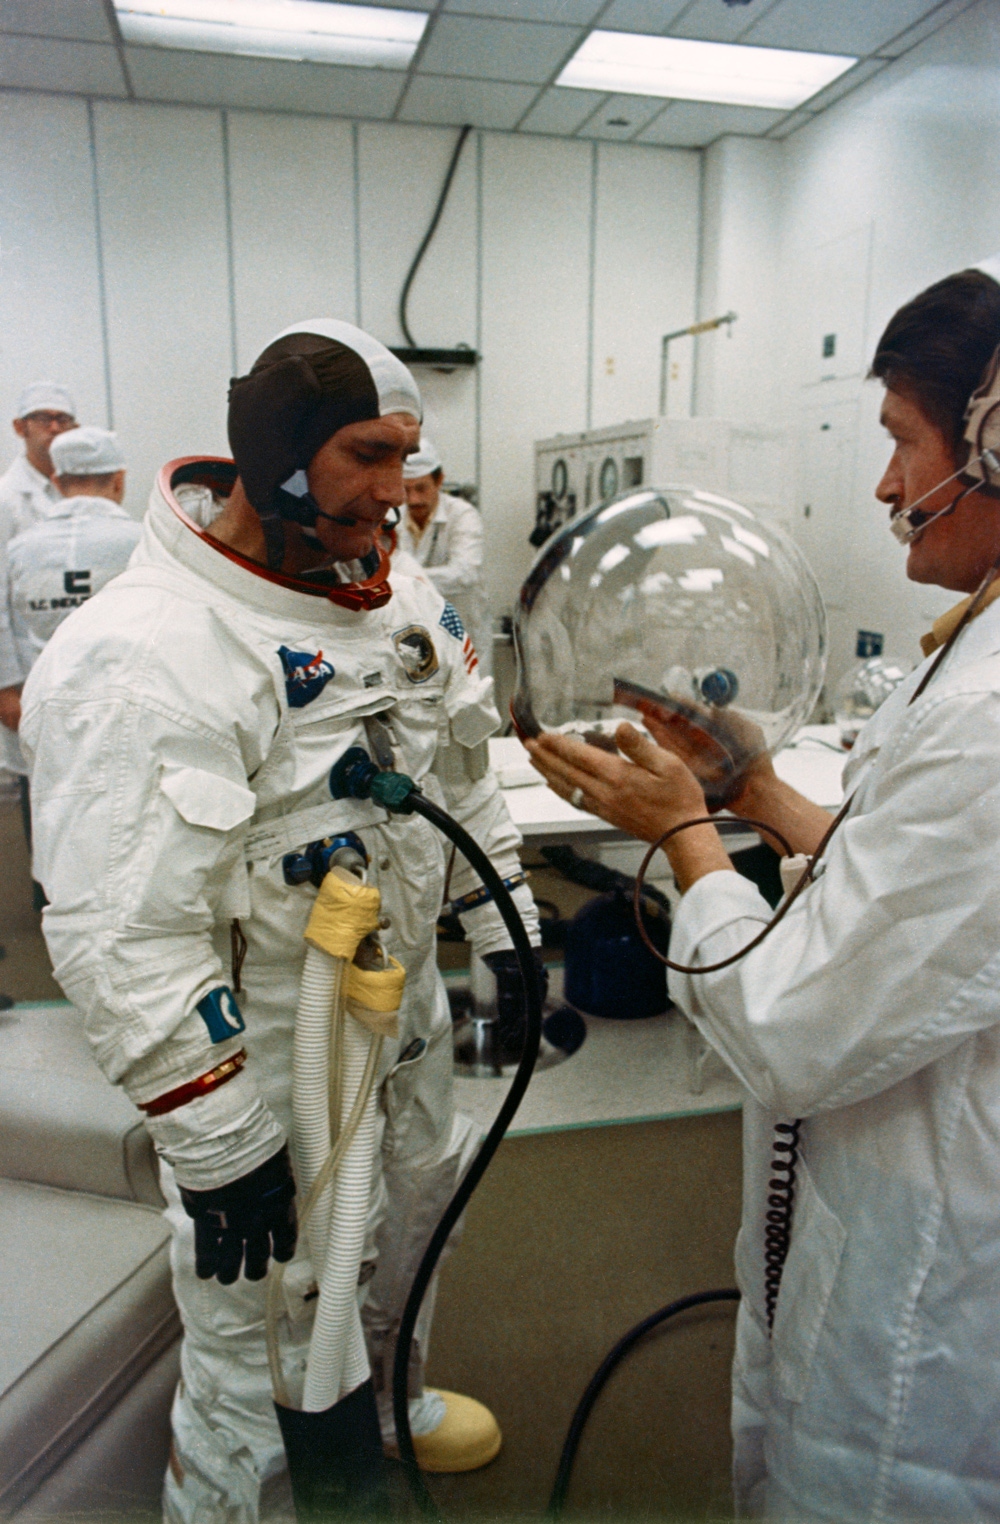 Astronaut preparing to don helmet with help of another person, in a white-walled room